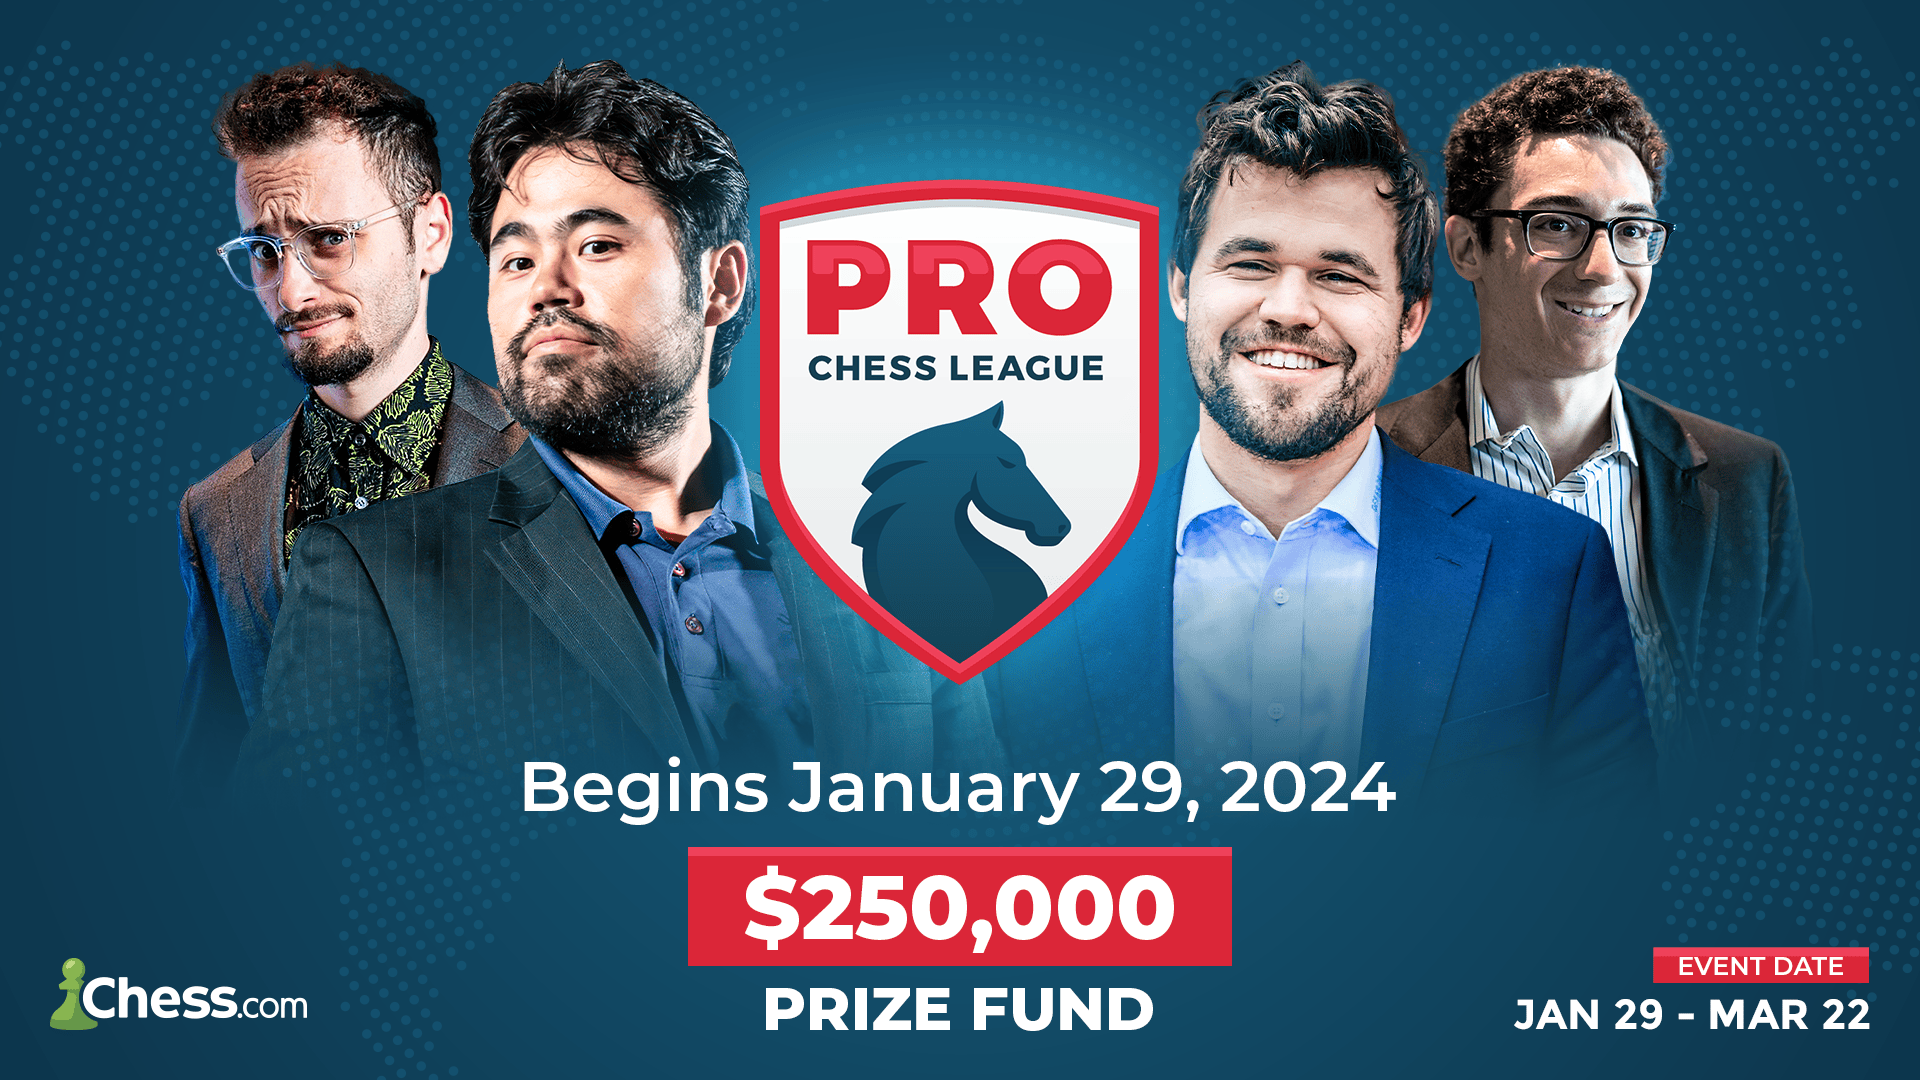 Pro Chess League 2024 Teams Gear Up To Fight For Biggest Prize Fund